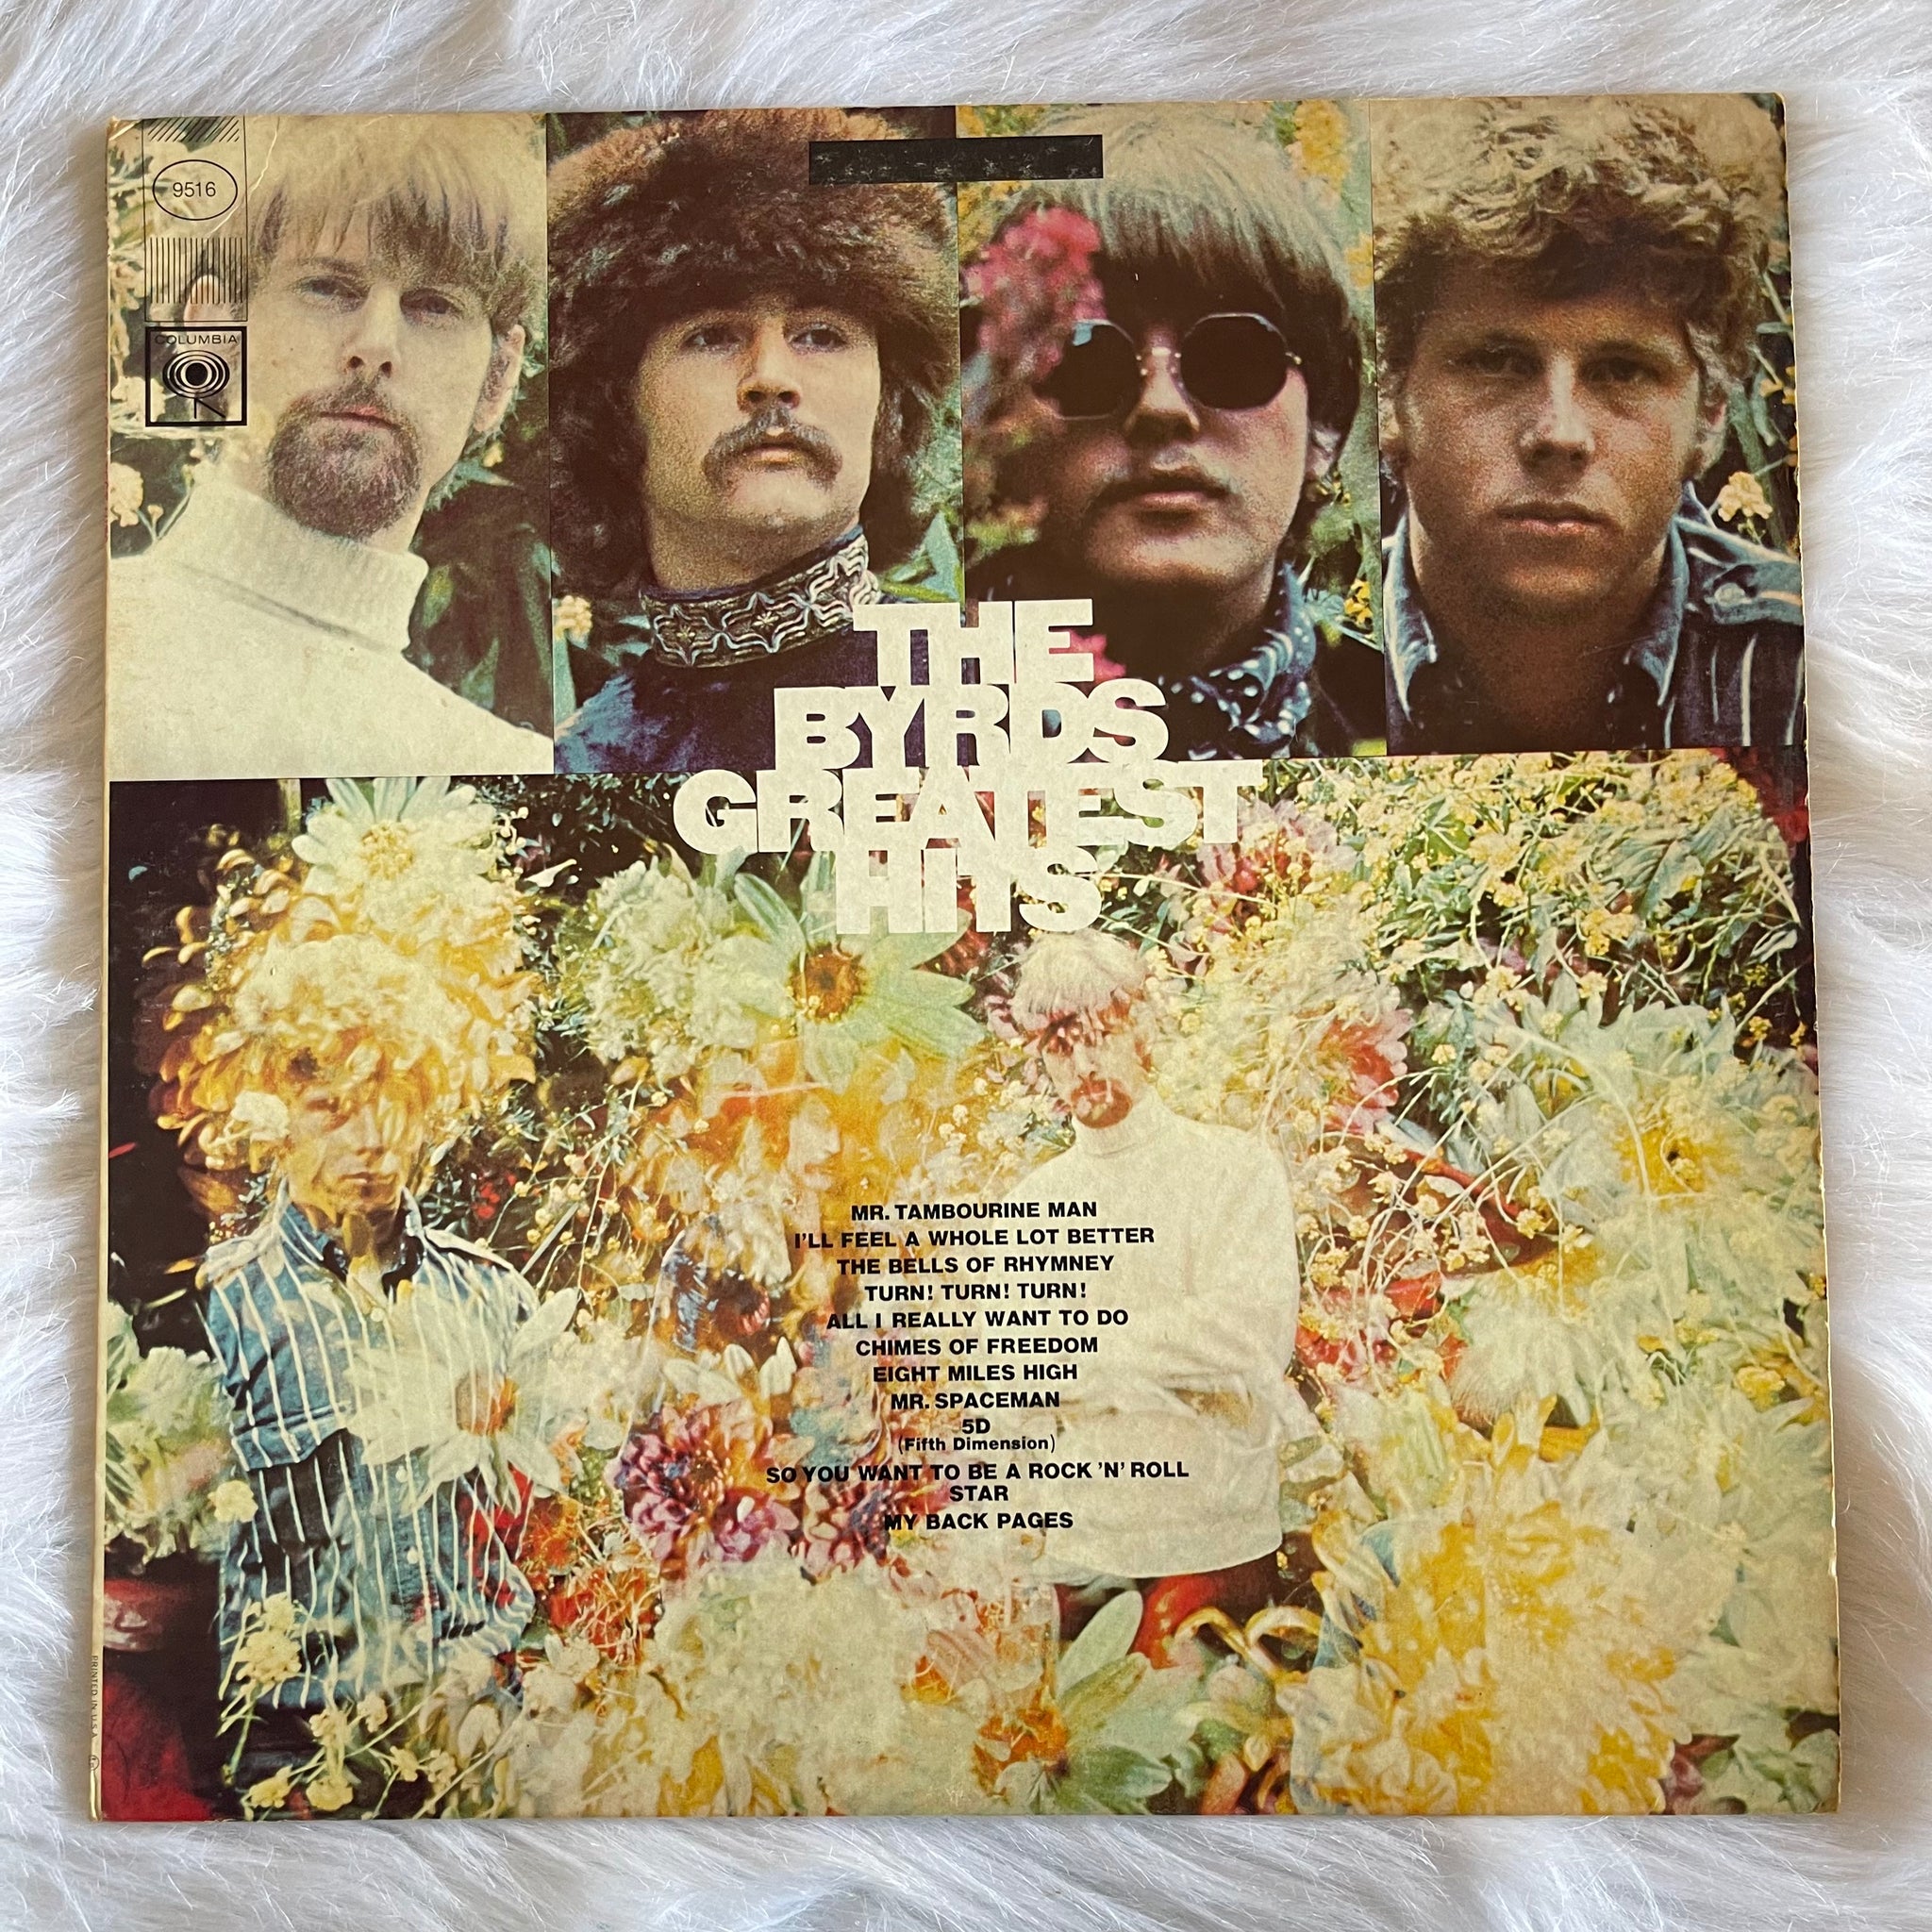 The Byrds-The Byrds Greatest Hits